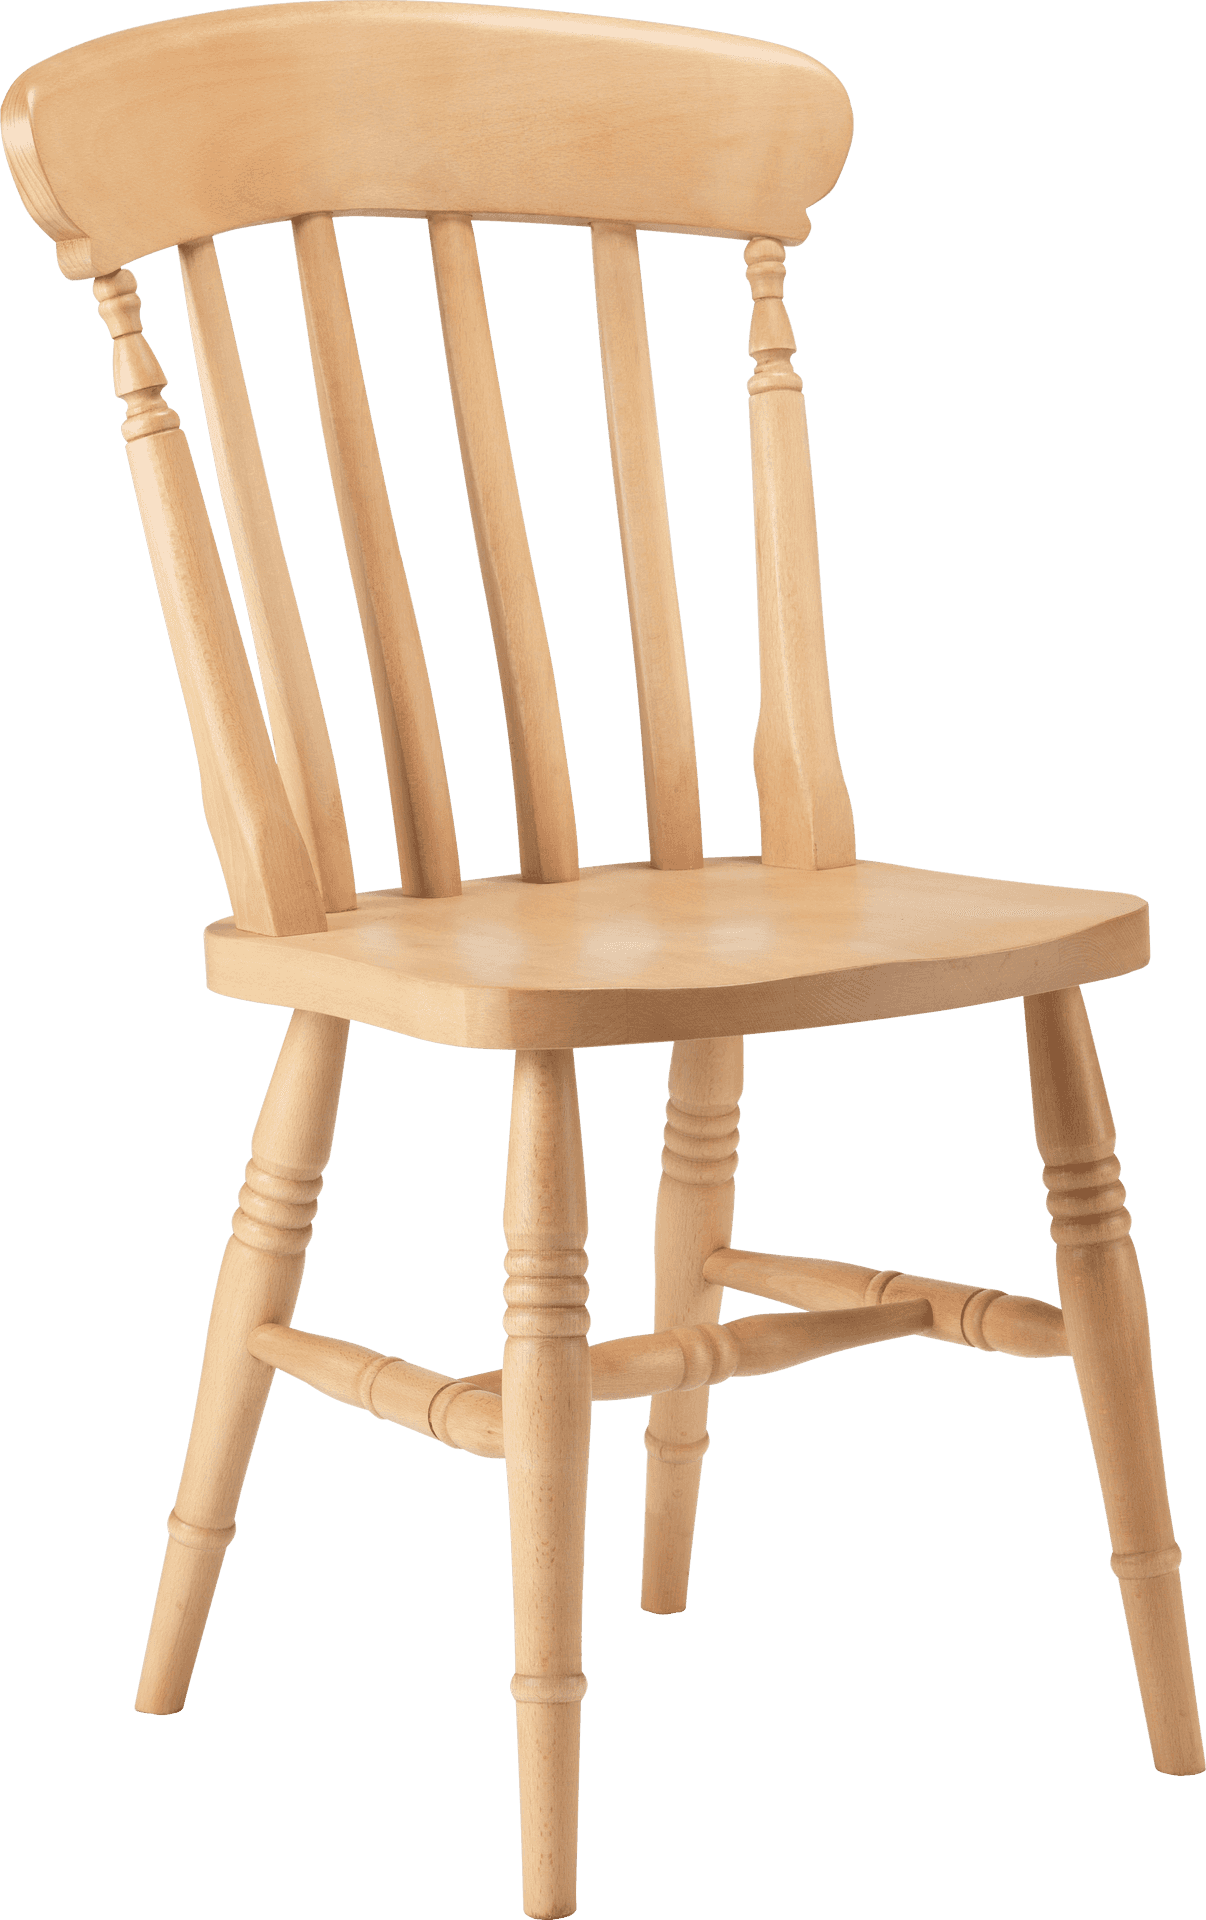 Wooden Spindle Back Chair Isolated PNG